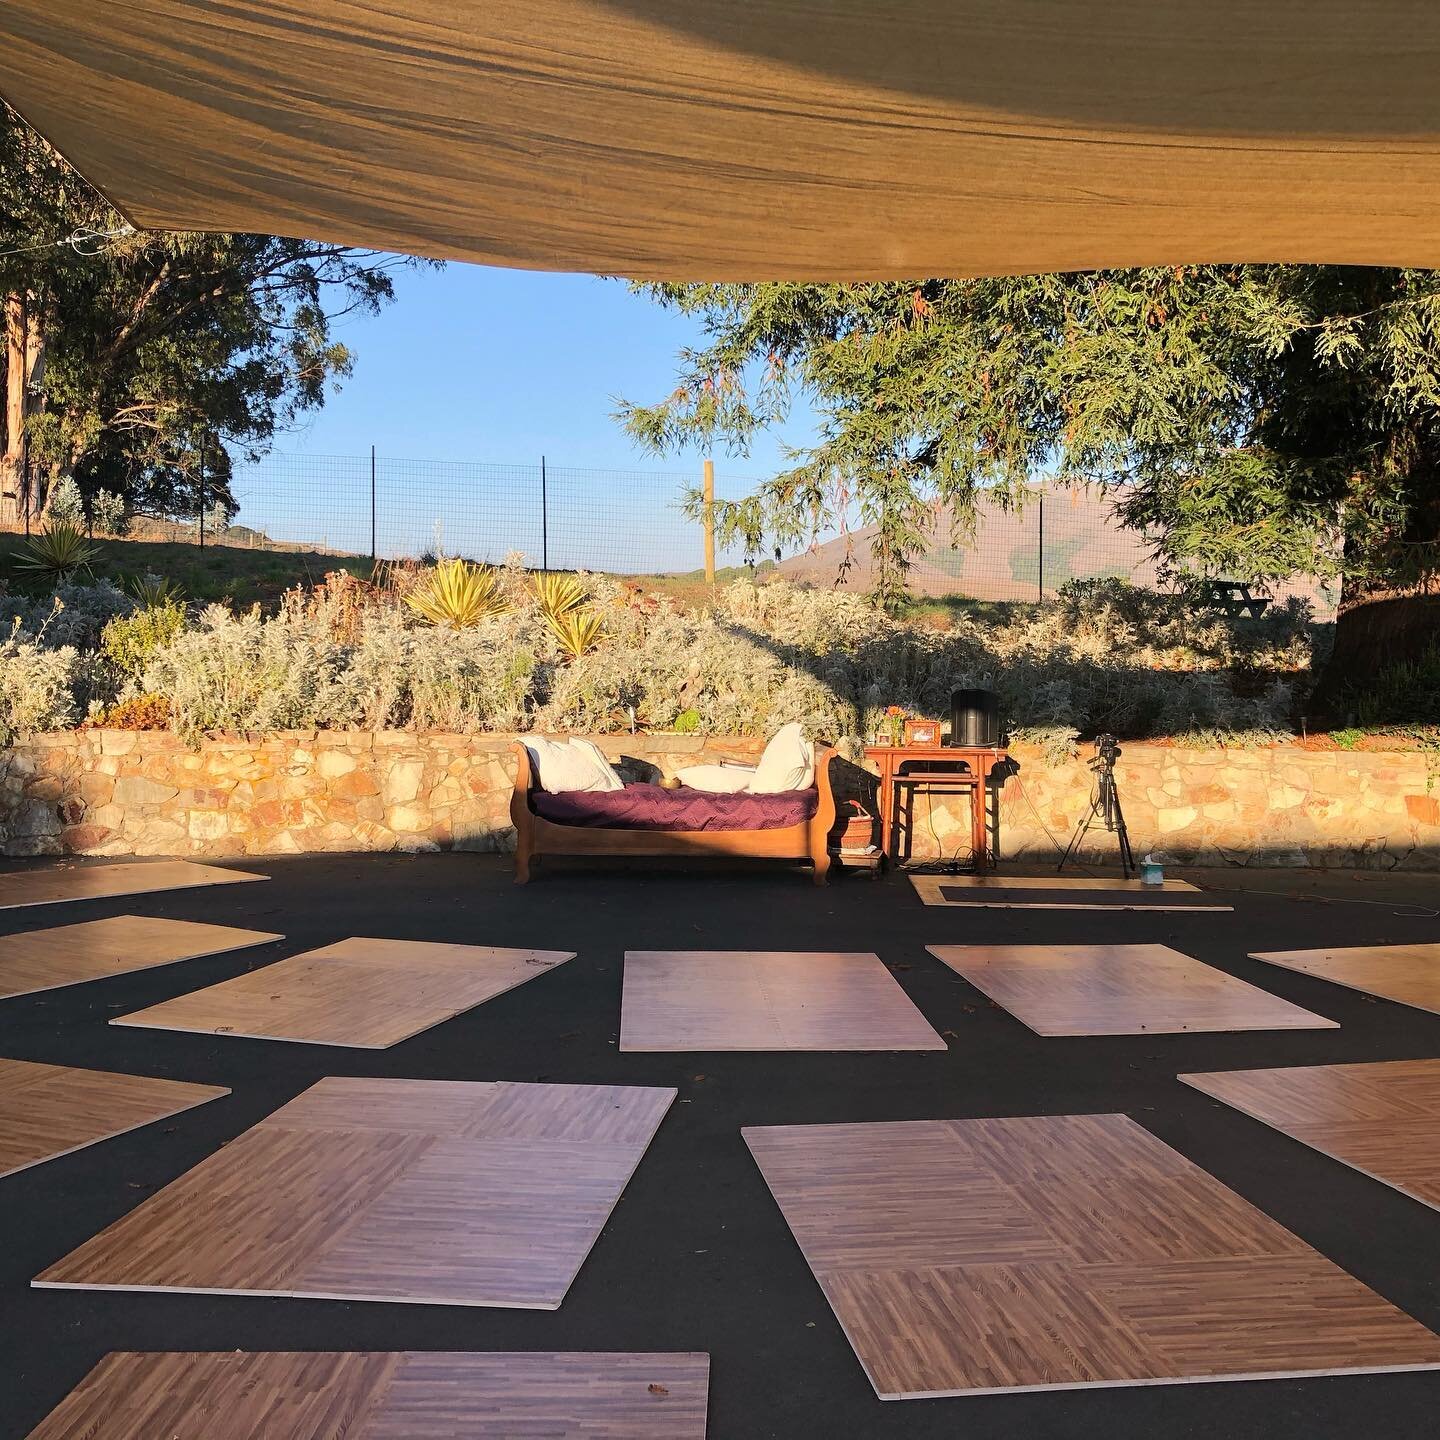 The first ever @pointreyesyoga 200 hour teacher training is under way. We feel so honored to guide this group through this month long immersive experience. It&rsquo;s only been 3 days and already there are so many heart openings, breakthroughs, and b